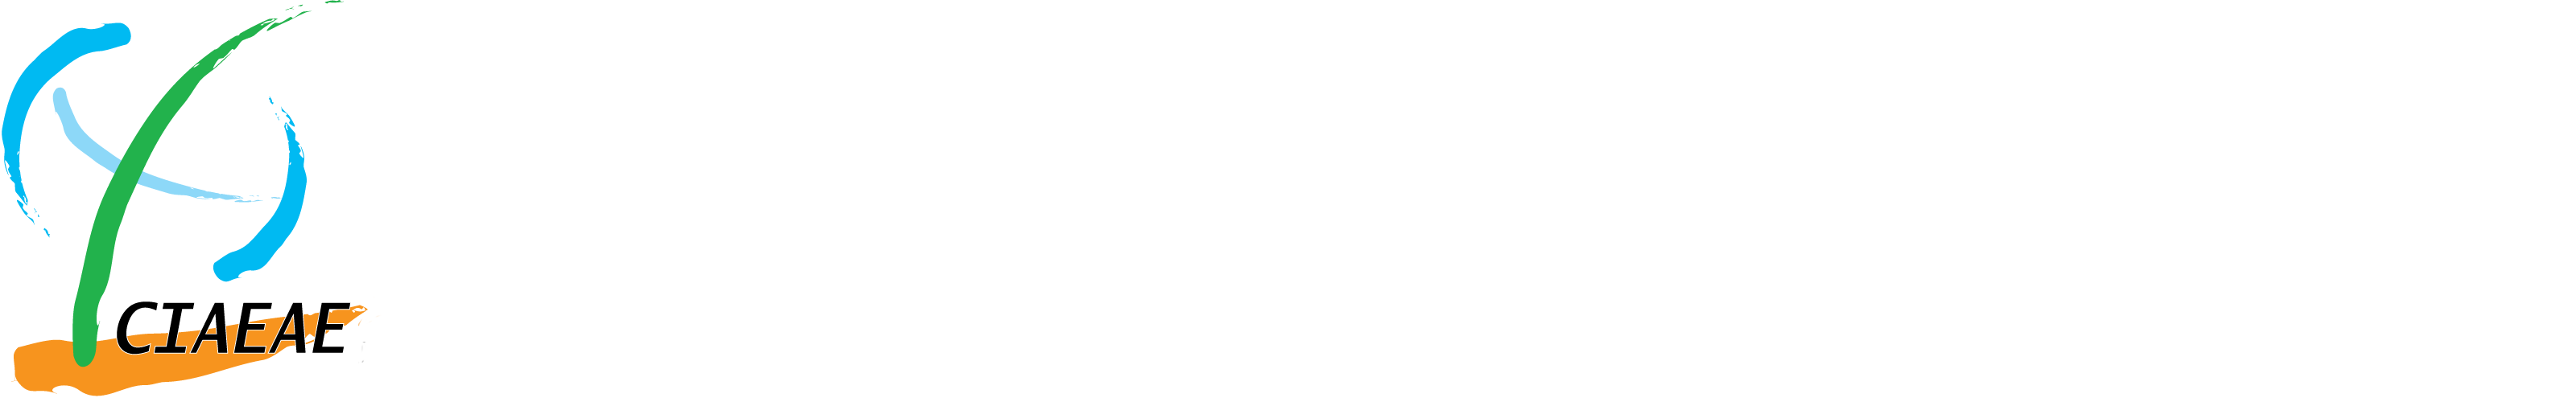 Center for International Agricultural Education and Academic Exchanges Logo